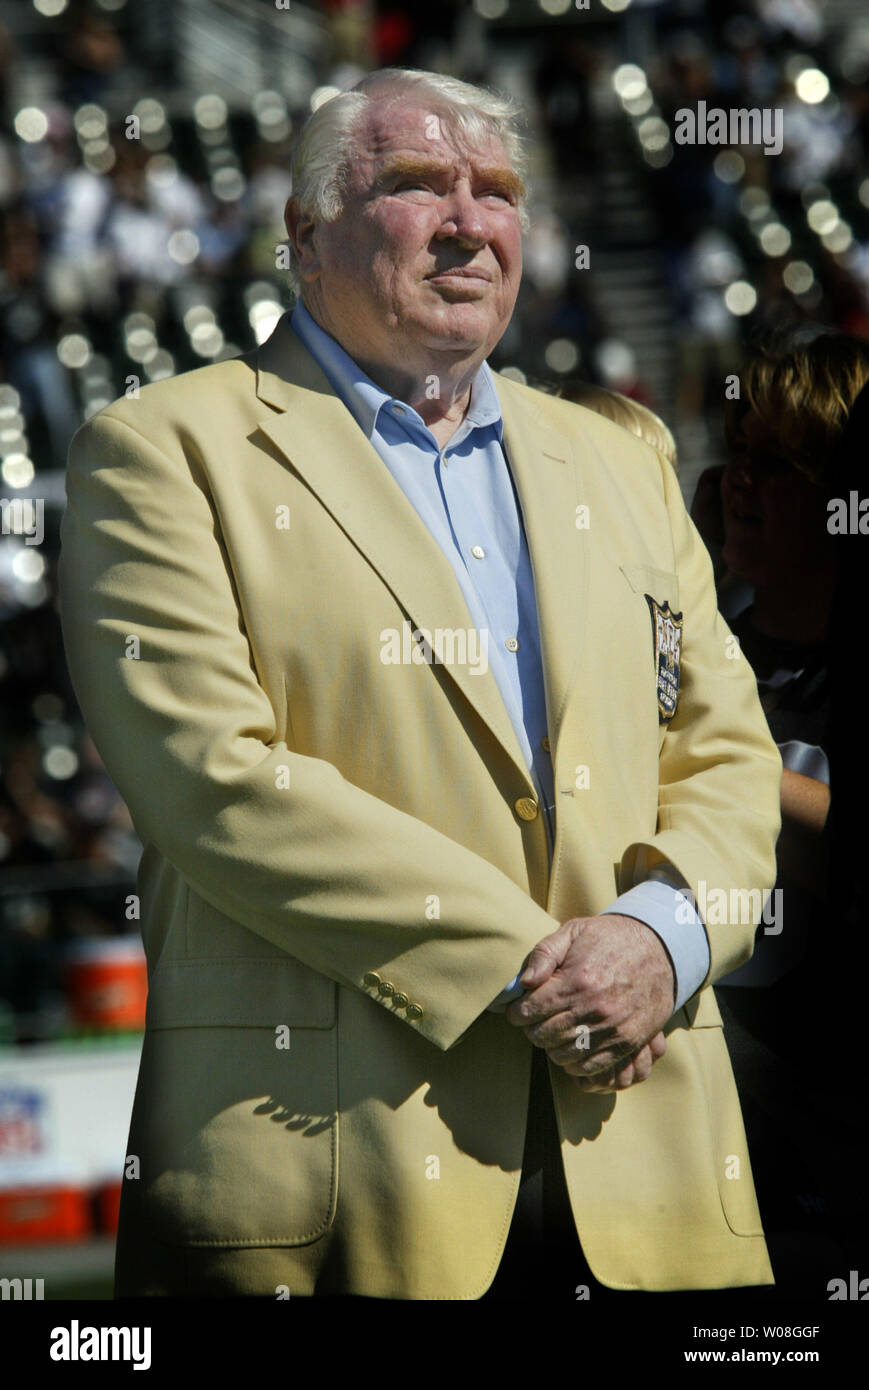 Former Raiders coach, broadcaster, and now Hall of Famer John